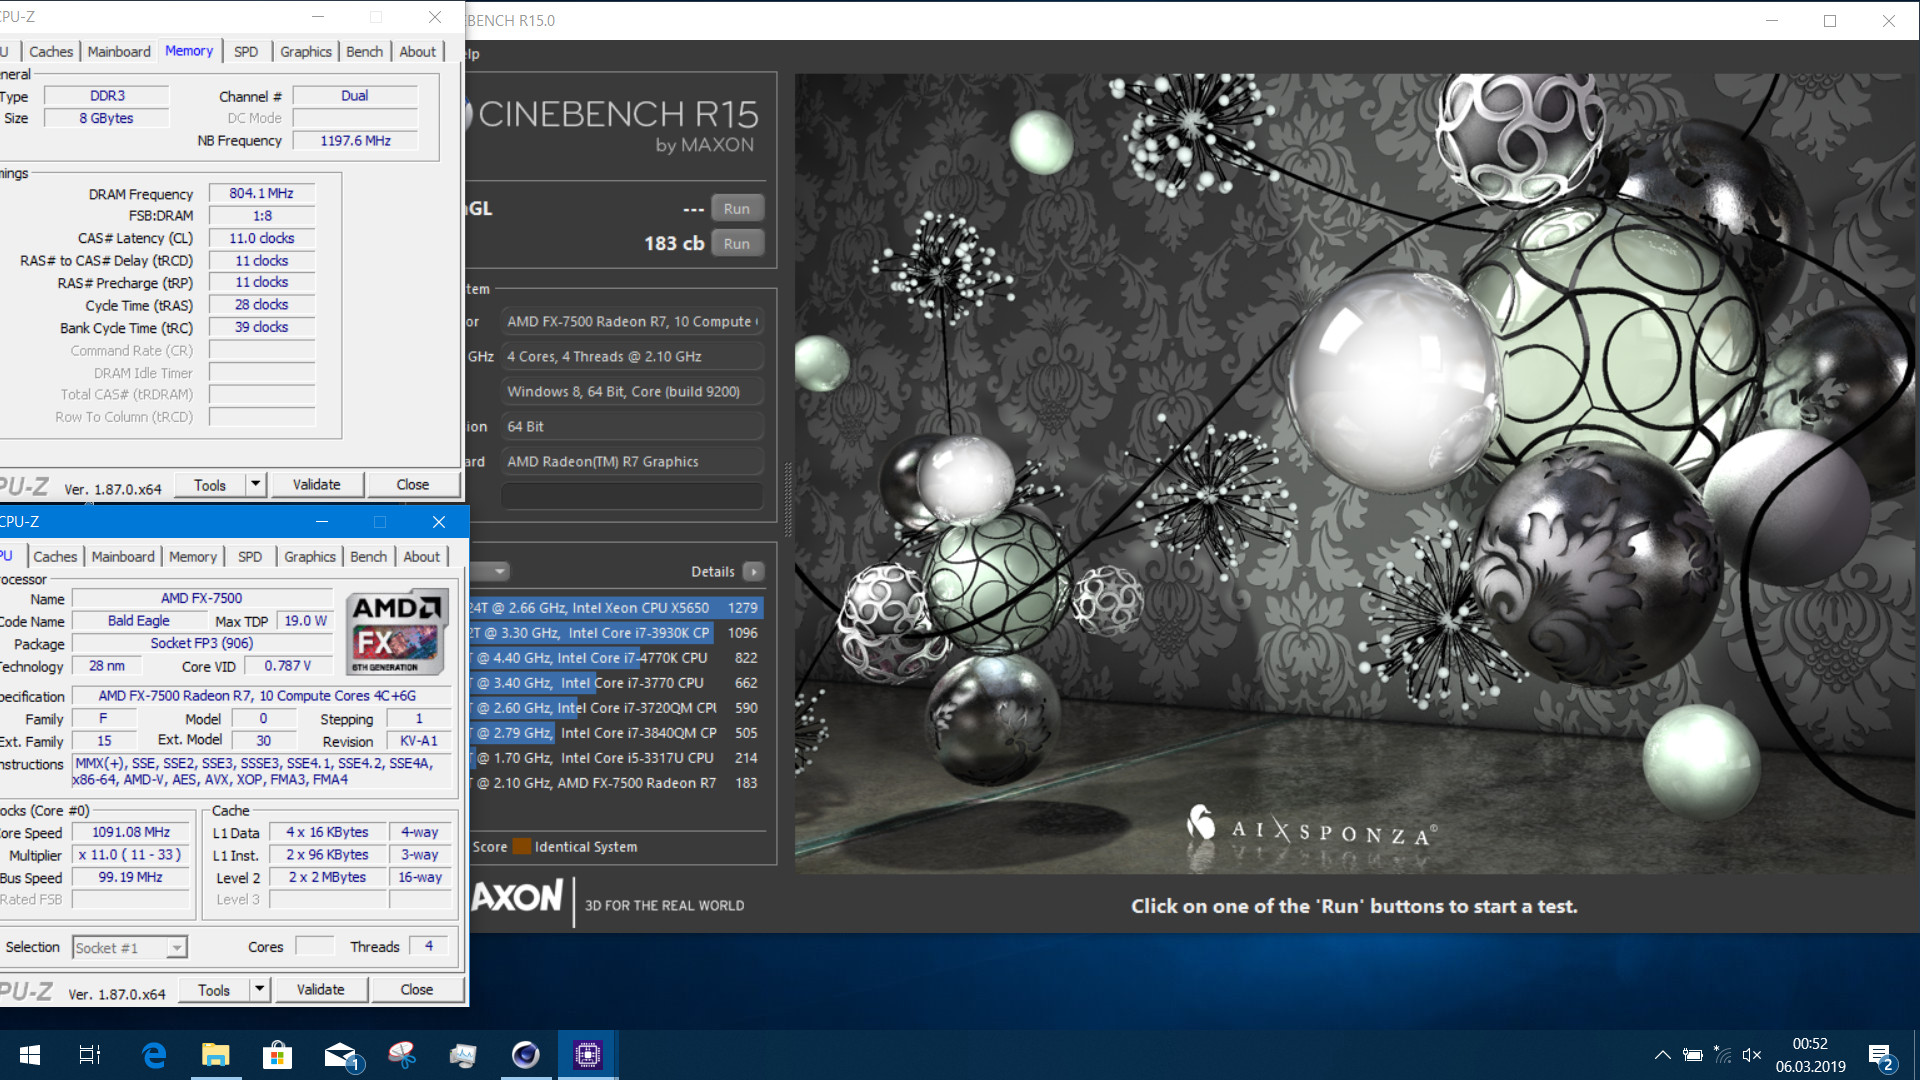 ThE-RiP`s Cinebench - R15 score: 183 cb with a FX-7500